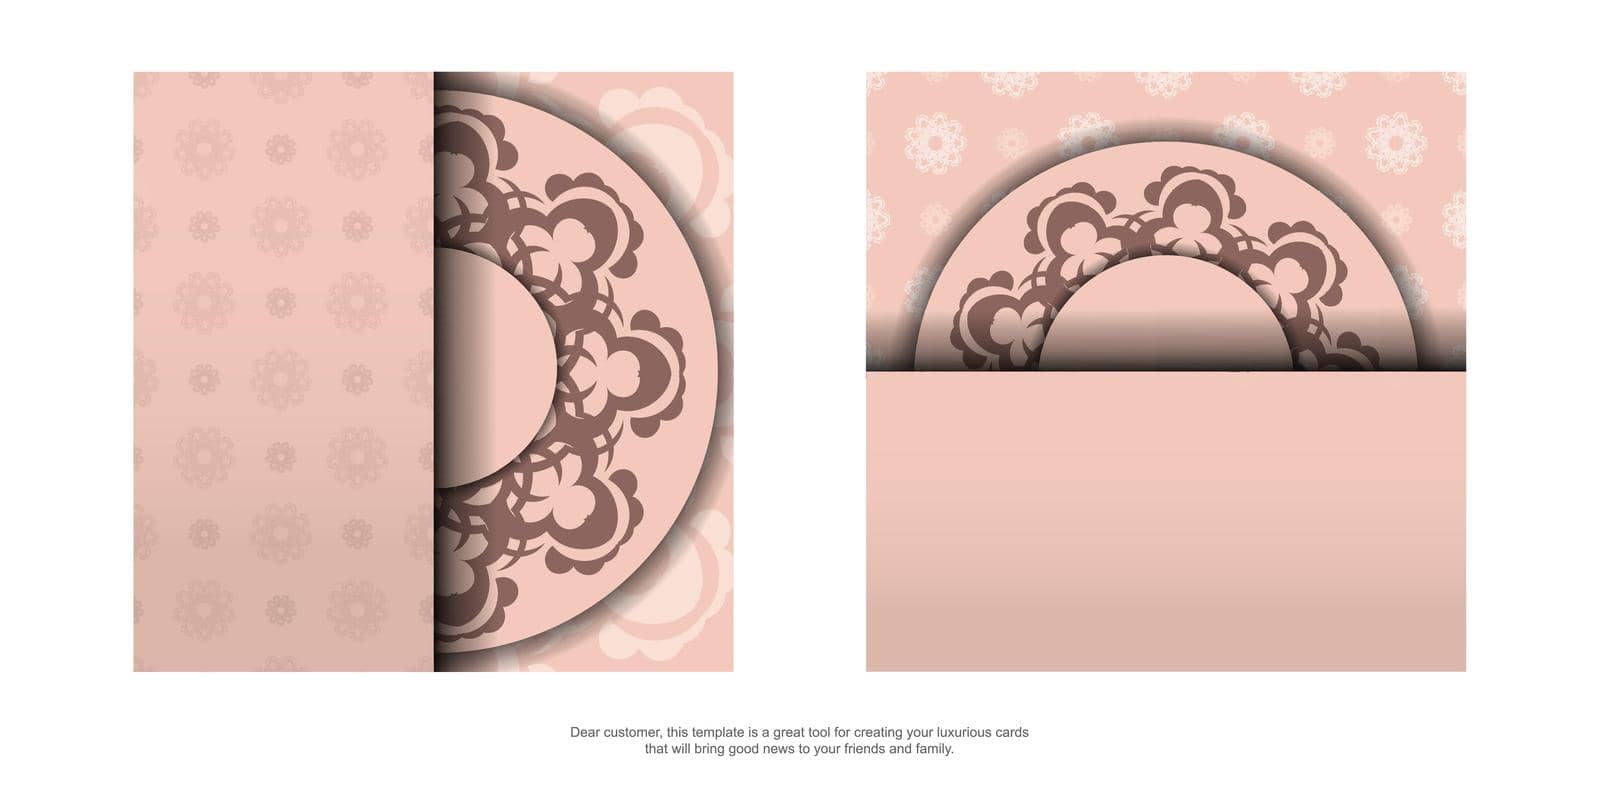 Leaflet in pink with Indian pattern is ready for print.